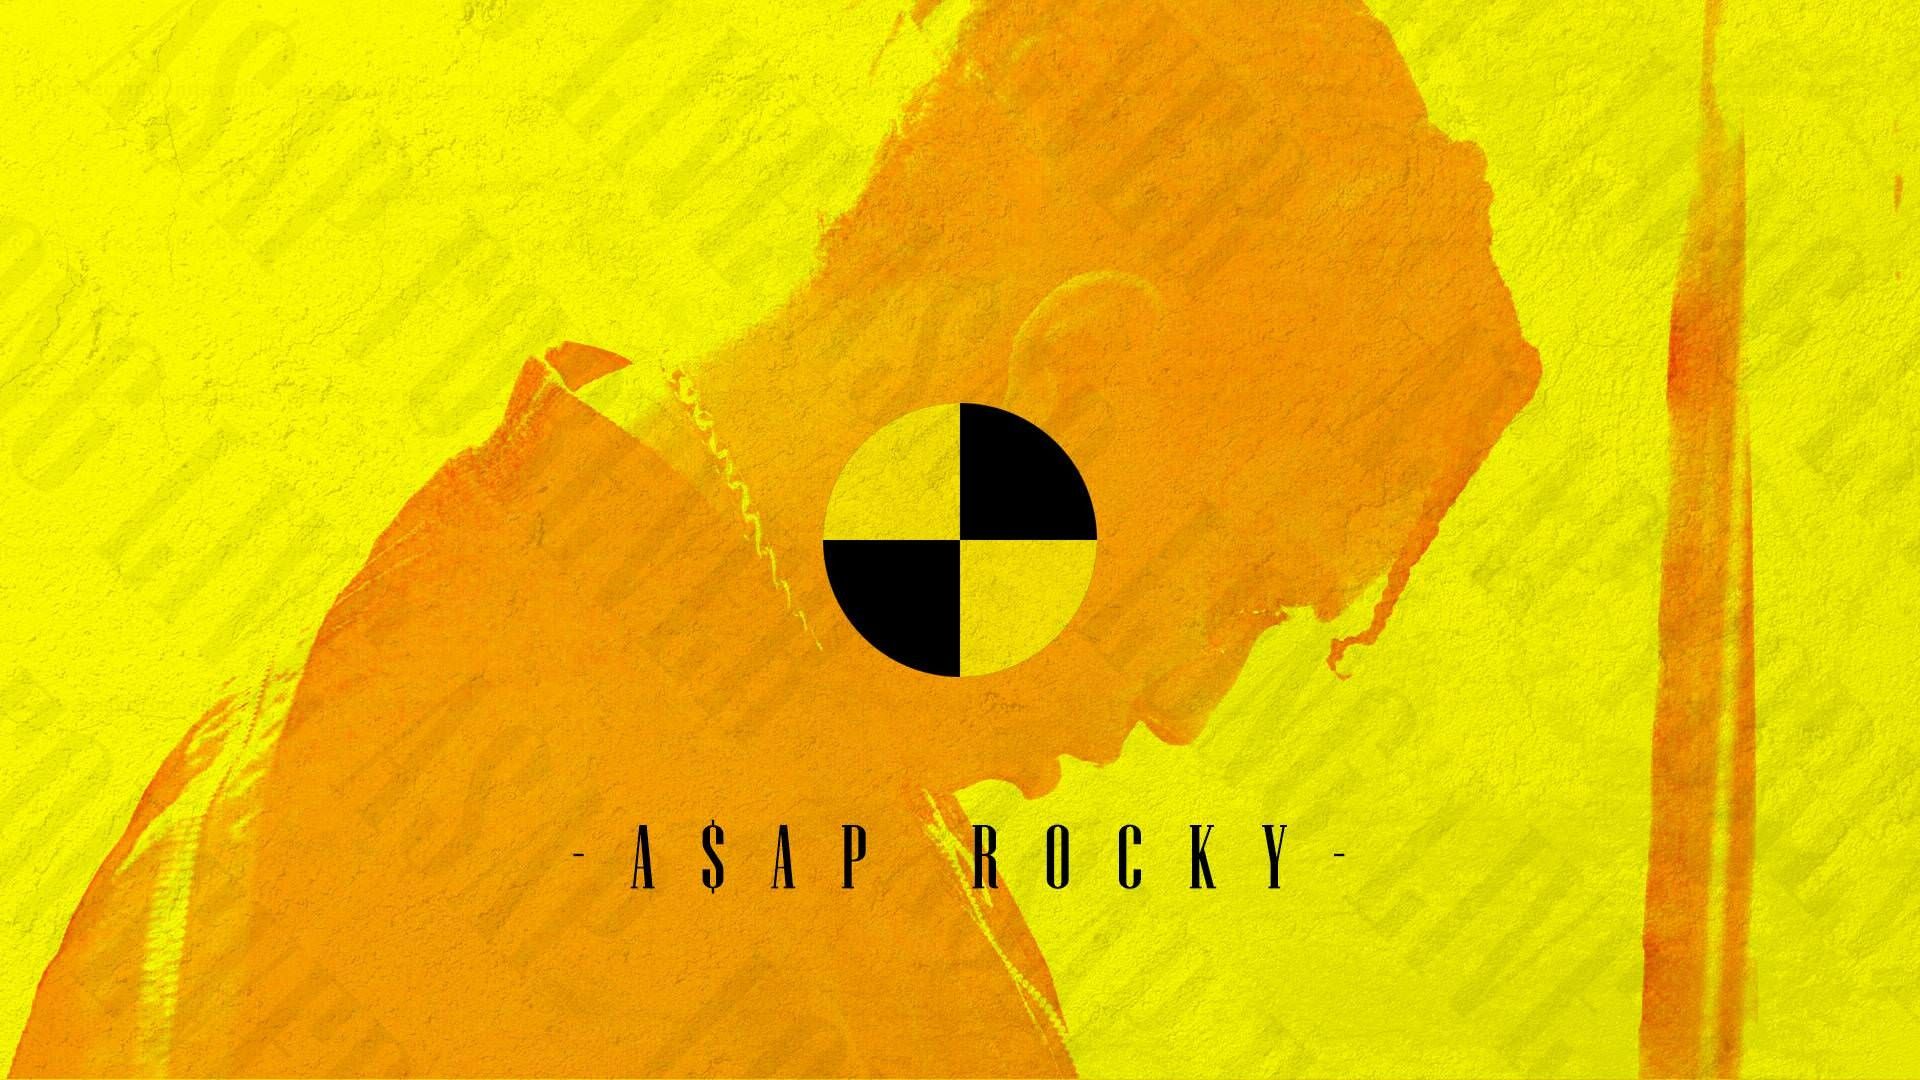 Made A Quick A$ap Rocky Background For Users, What Rocky